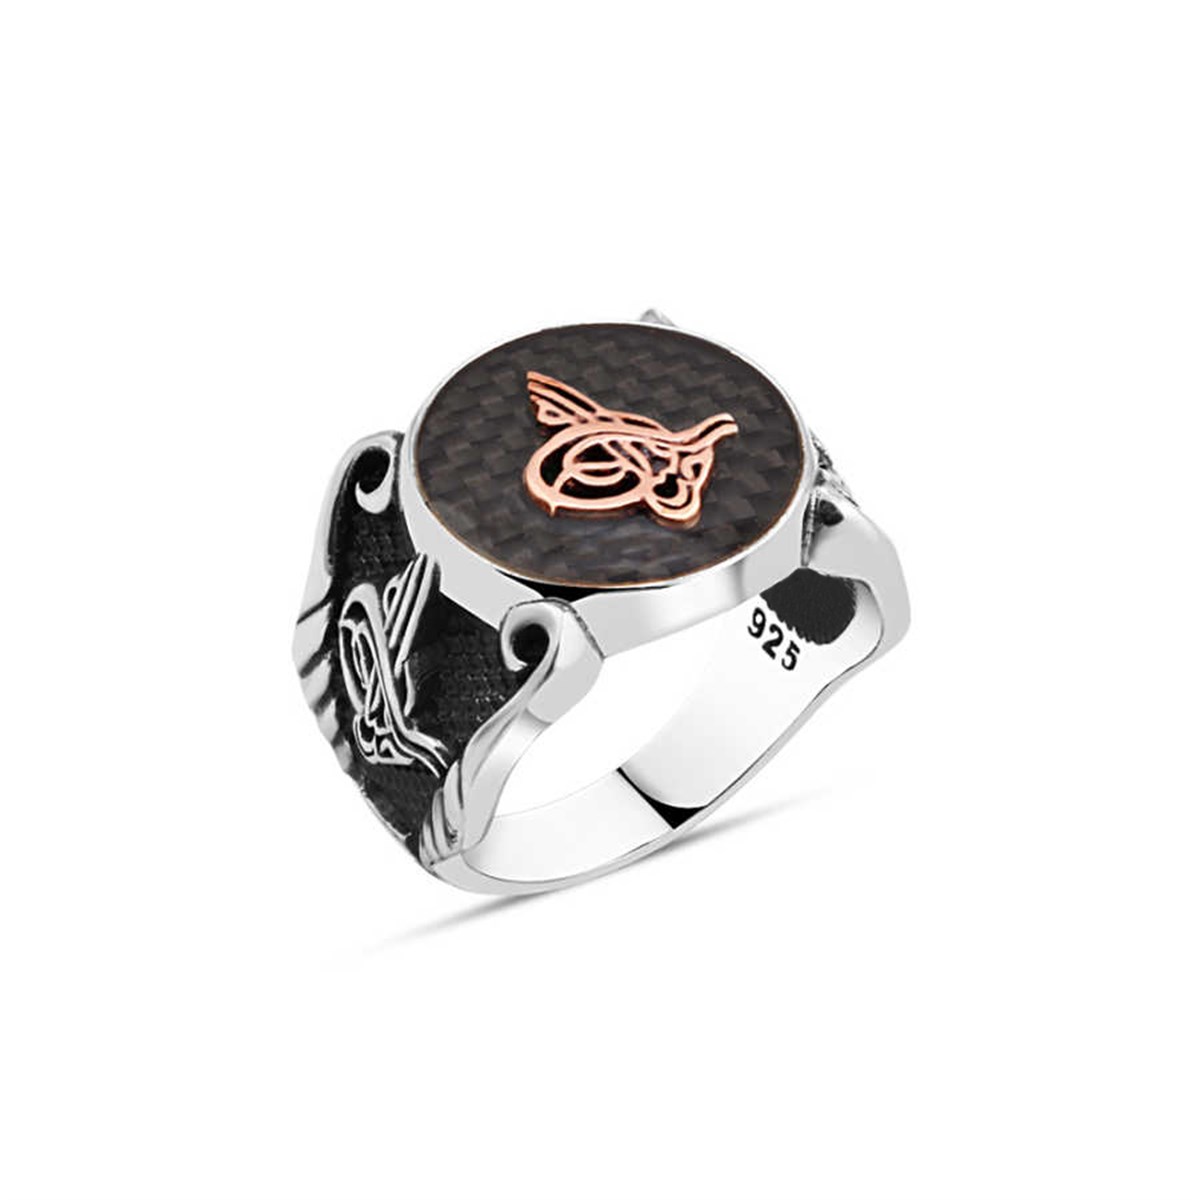 Silver Men's Ring with Tugra on Carbon